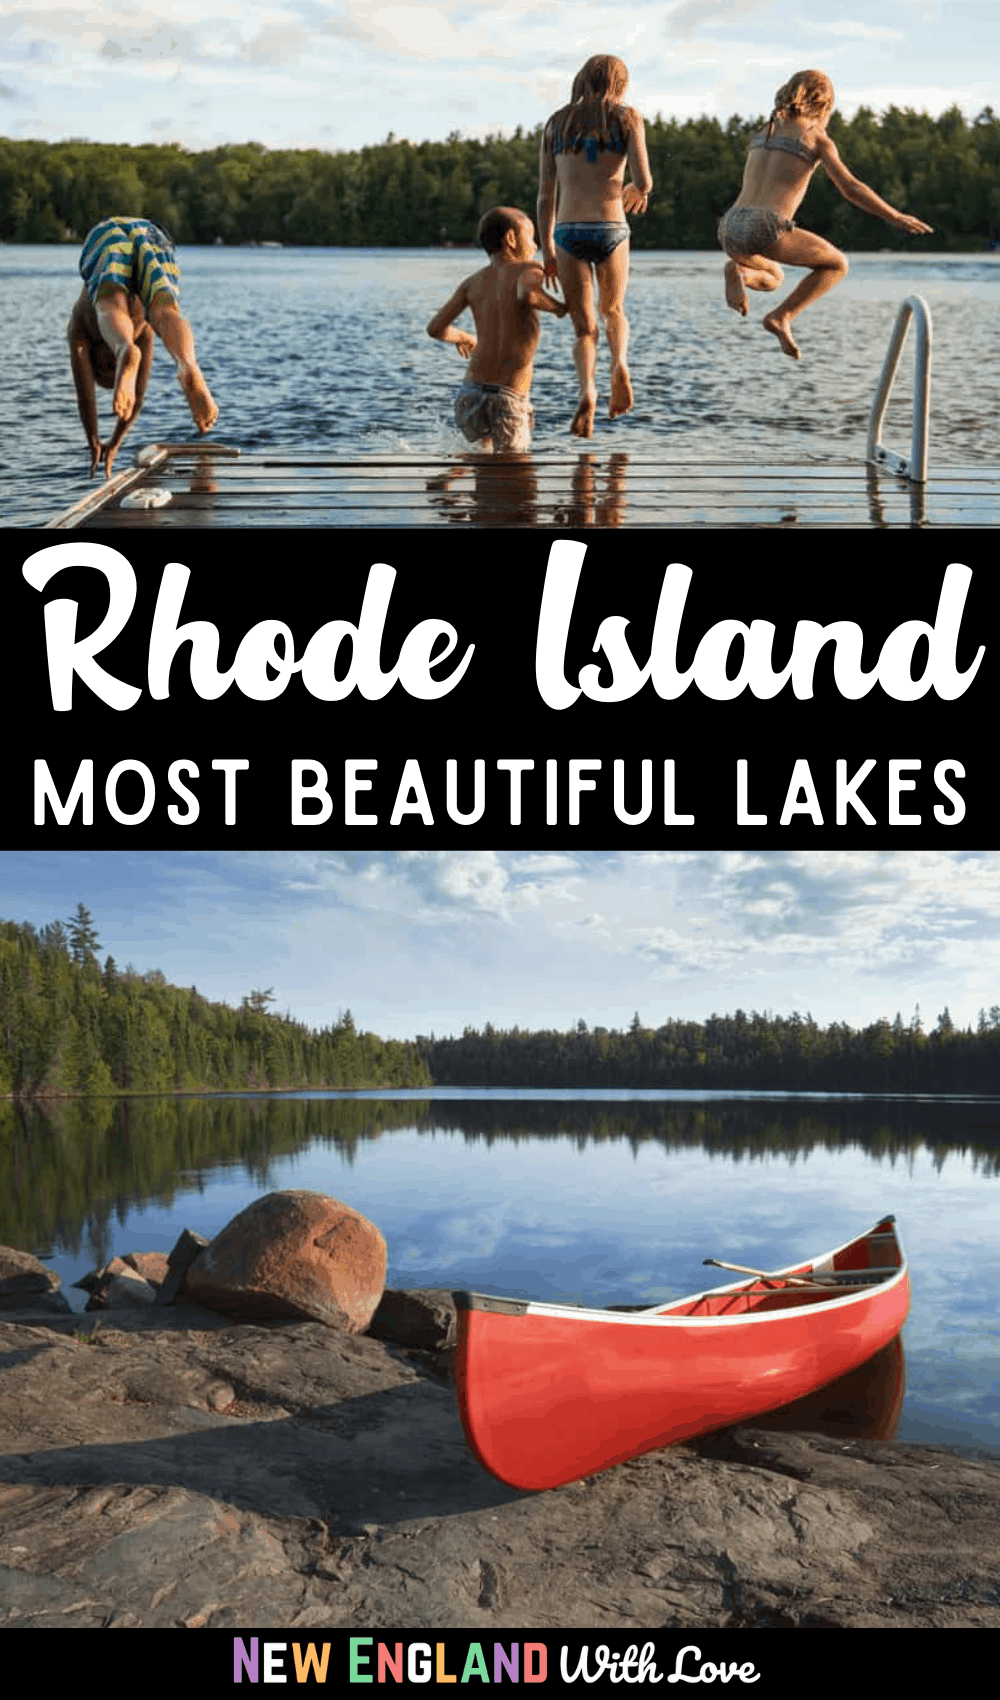 Pinterest graphic reading "Rhode Island Most Beautiful Lakes"